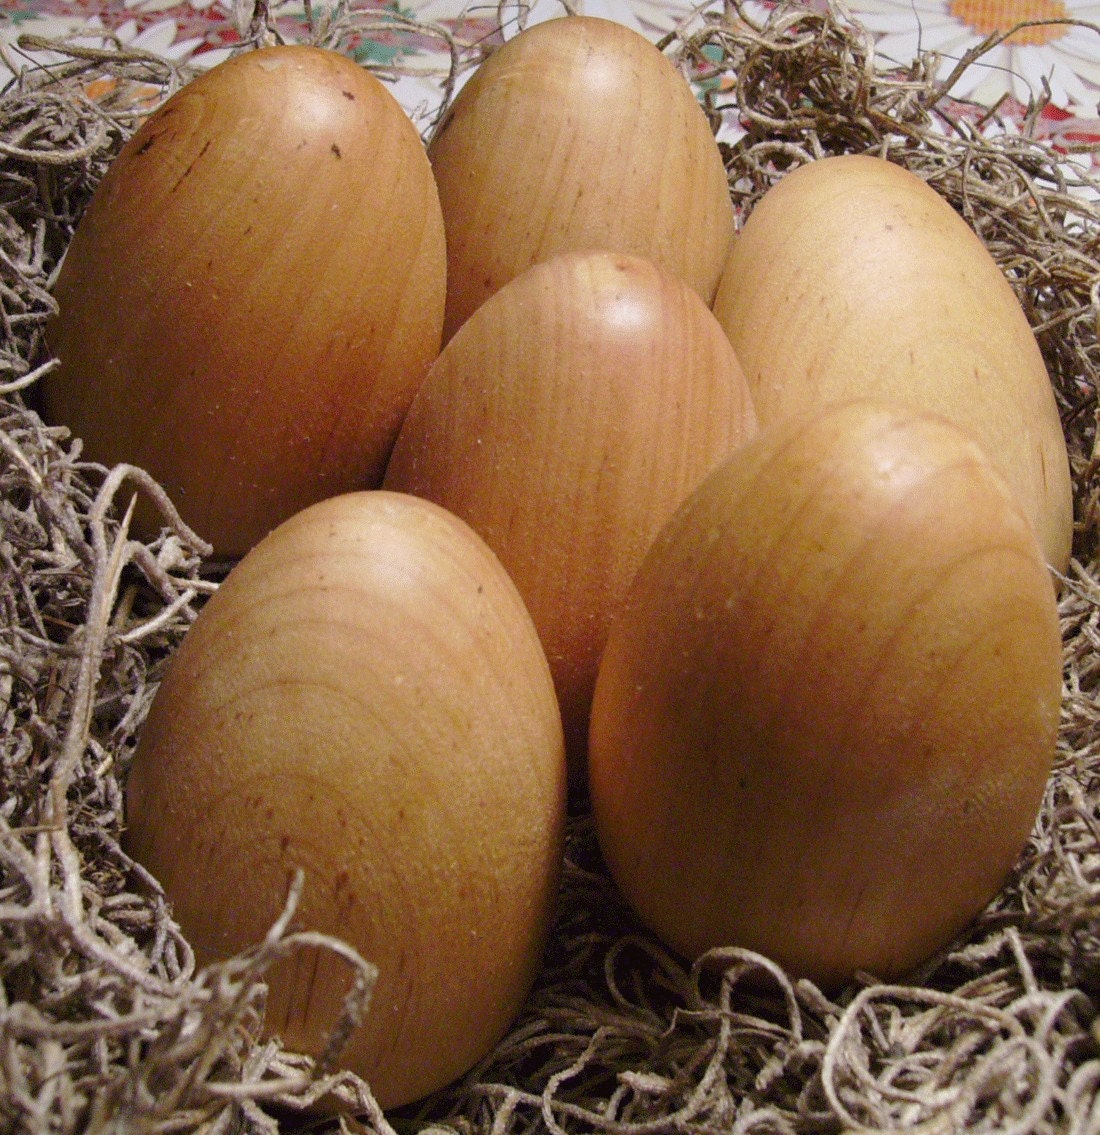 6 Natural Wood Eggs - Play Food - Pretend Play